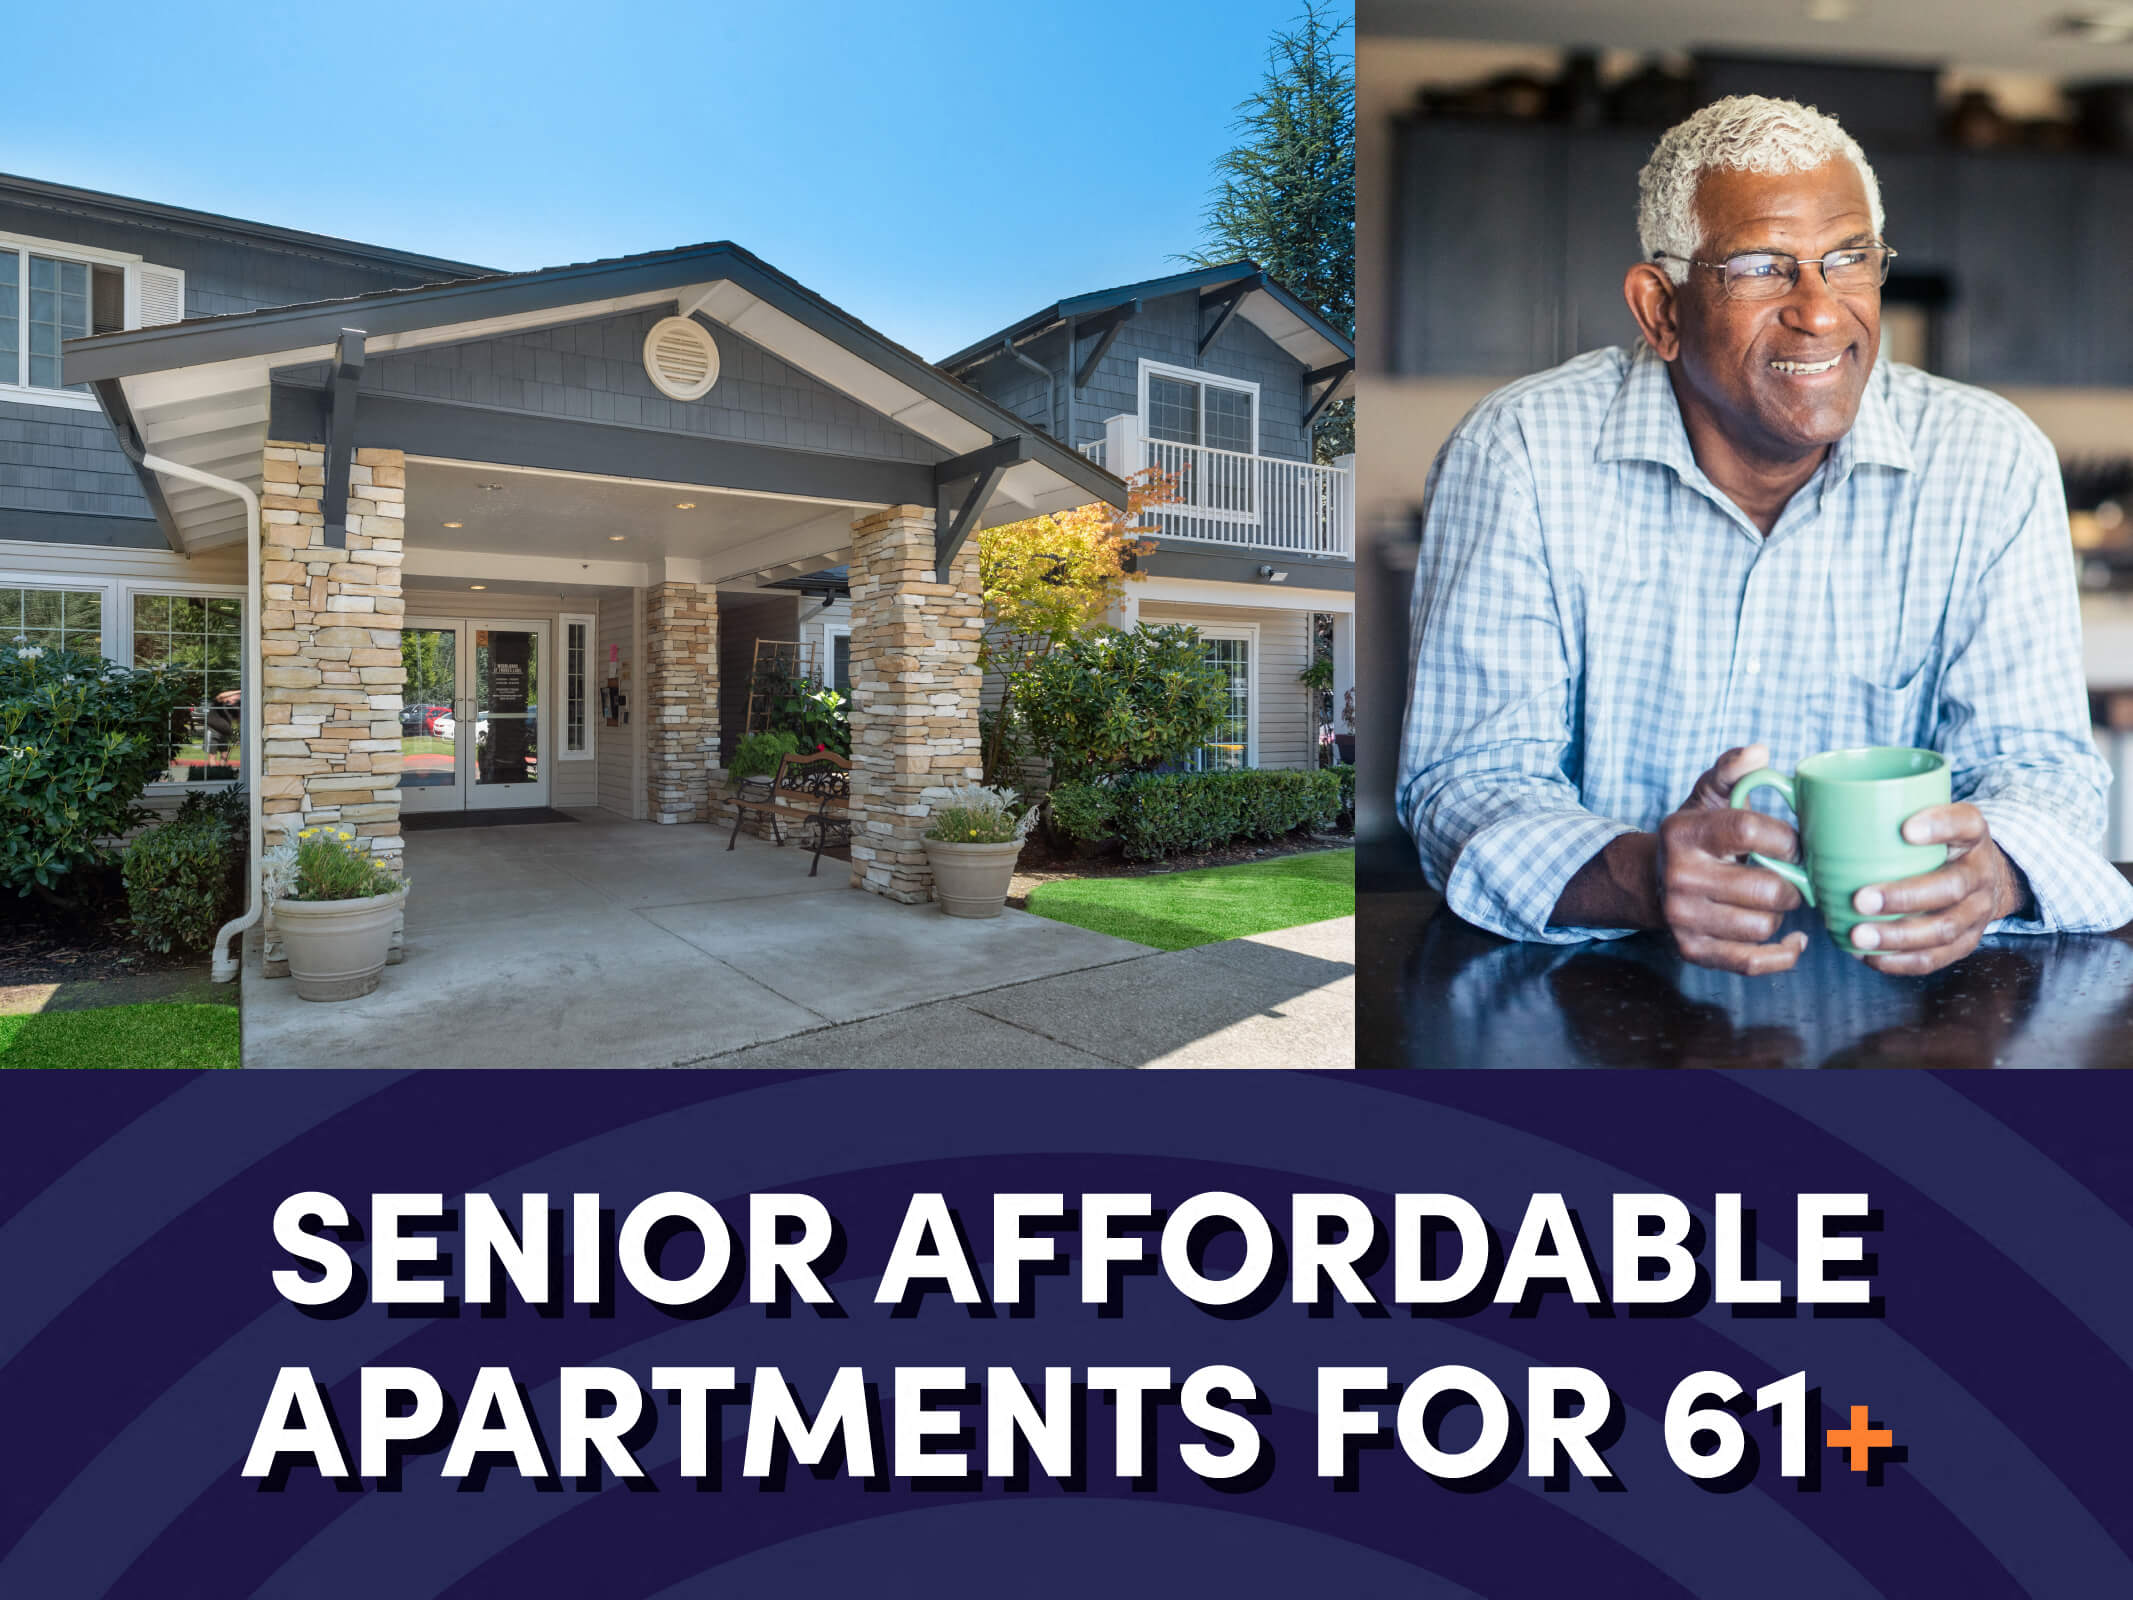 An image of a building entrance exterior, an image of a senior man holding a mug, and text at the bottom that reads “Senior Affordable Apartments for 61+” for the Woodlands at Forbes Lake Senior Affordable Apartments in Kirkland, Washington.